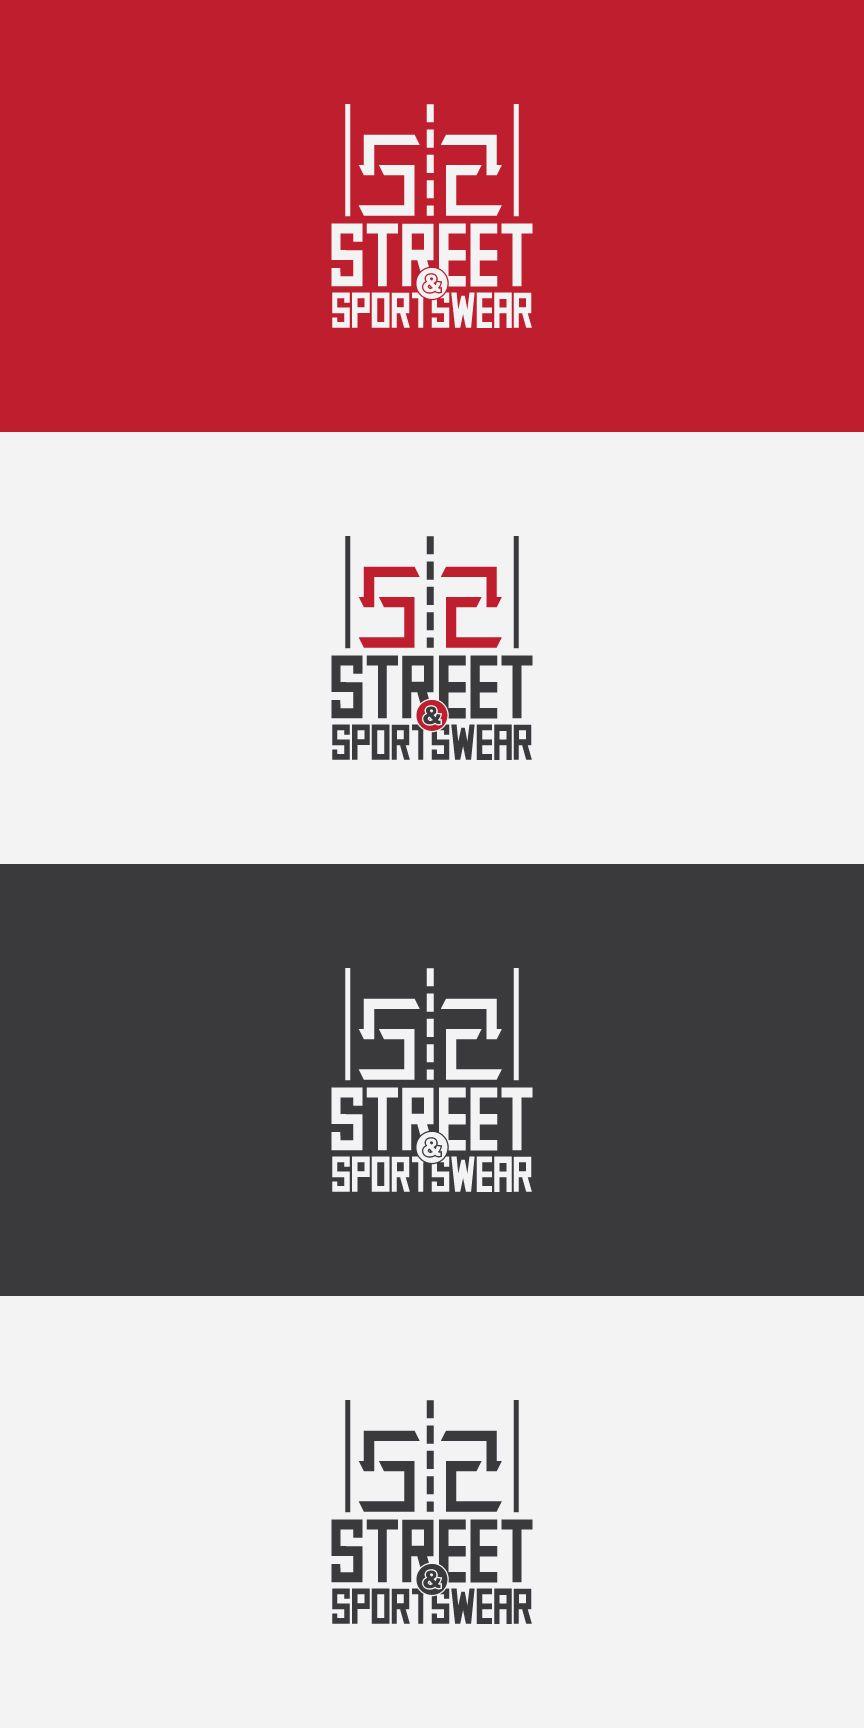 Cool SS Logo - Entry by anikgd for Design a cool Logo for Street & Sportswear